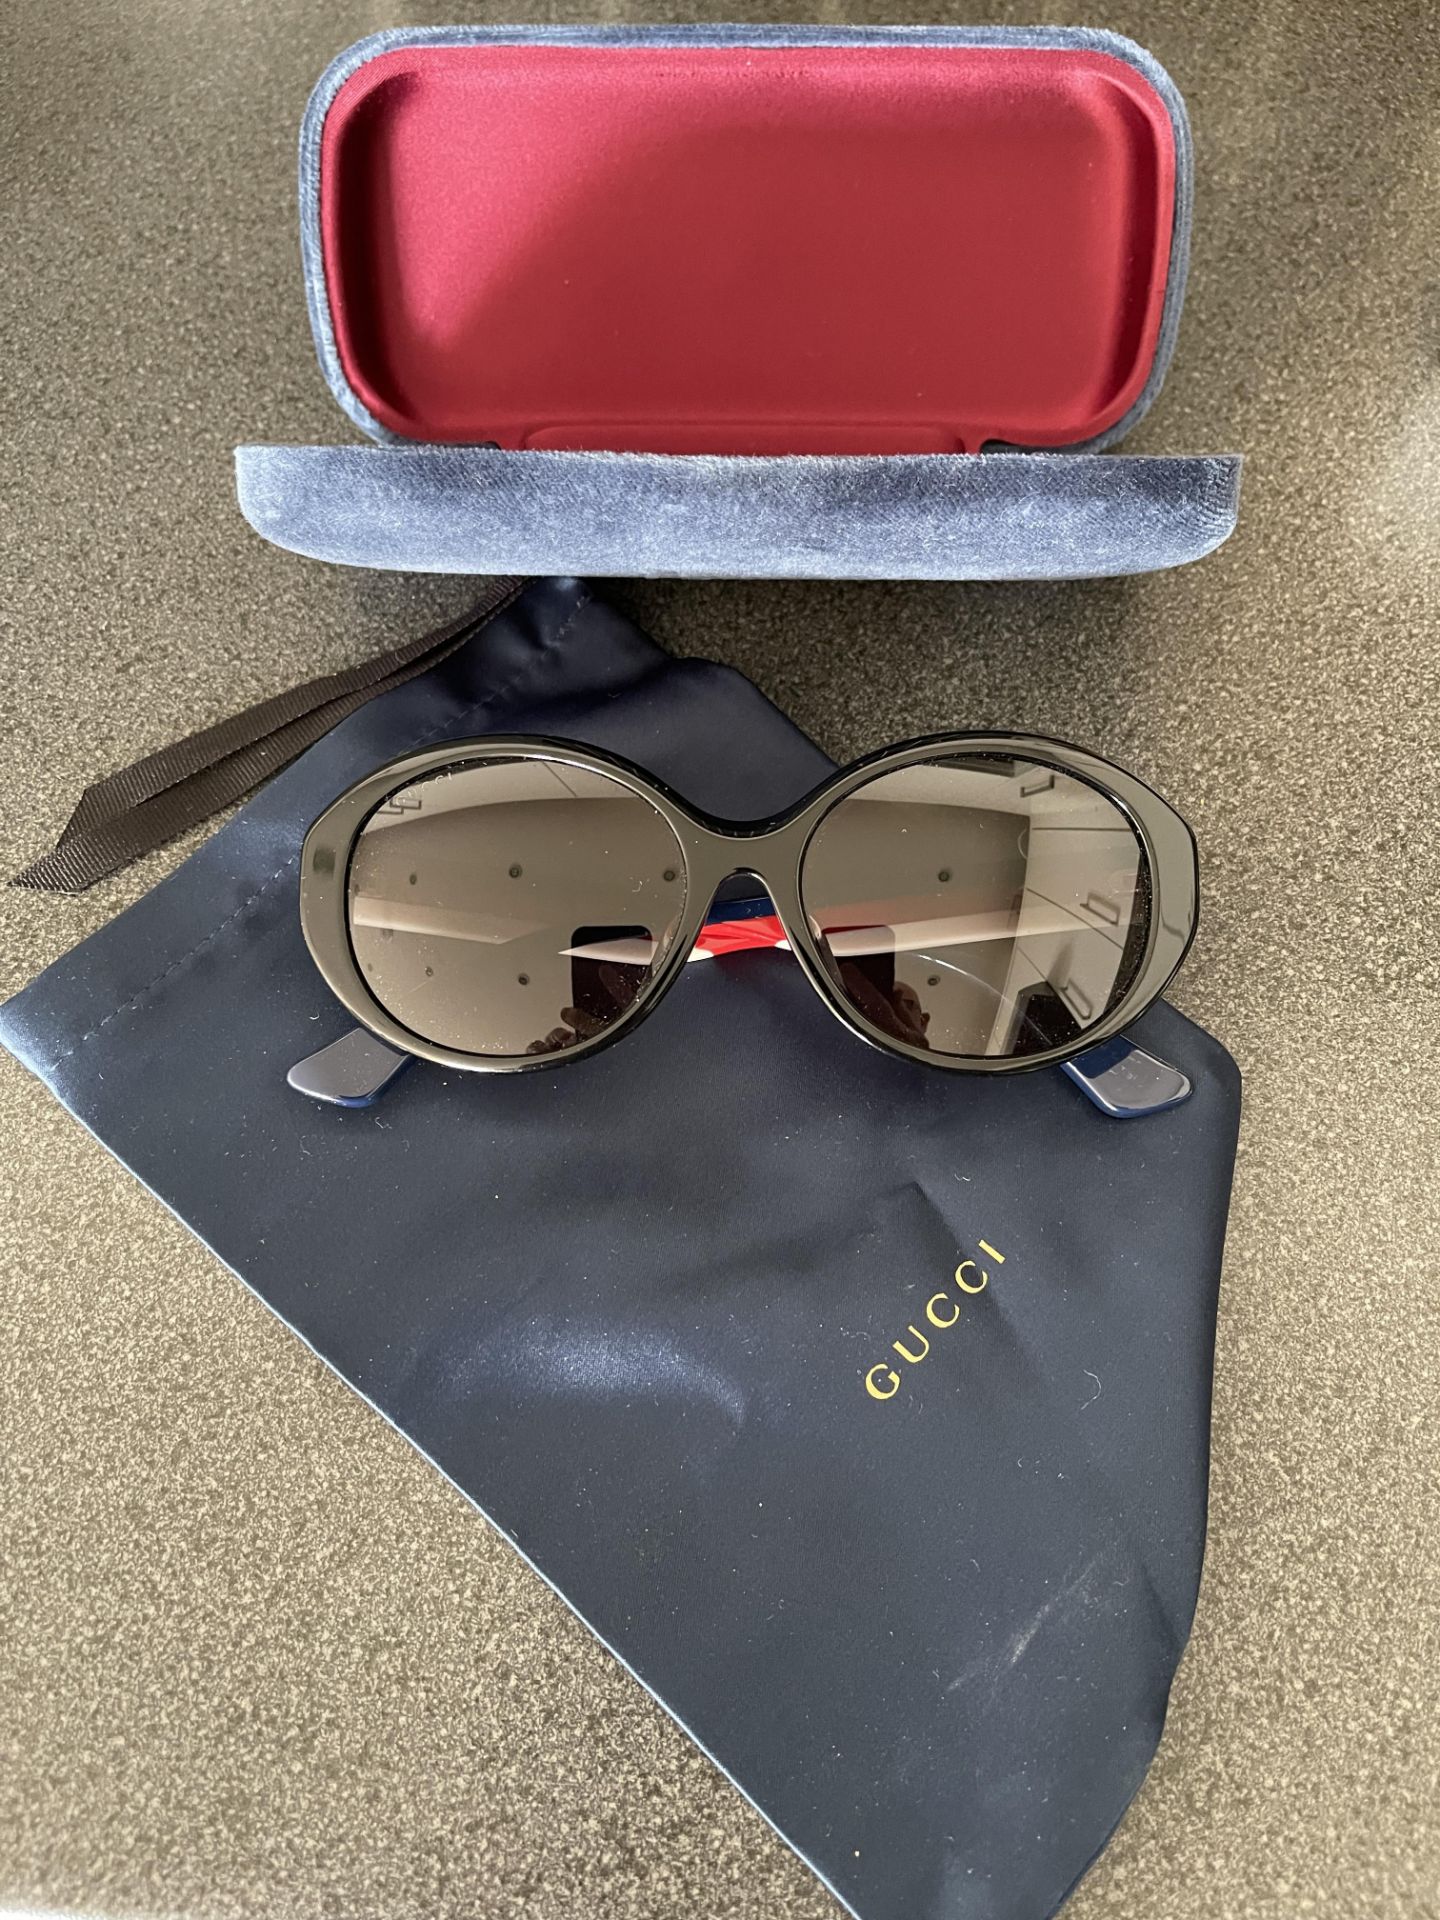 Gucci ladies sunglasses demon from a private jet charter. with case and cloth - Image 2 of 3